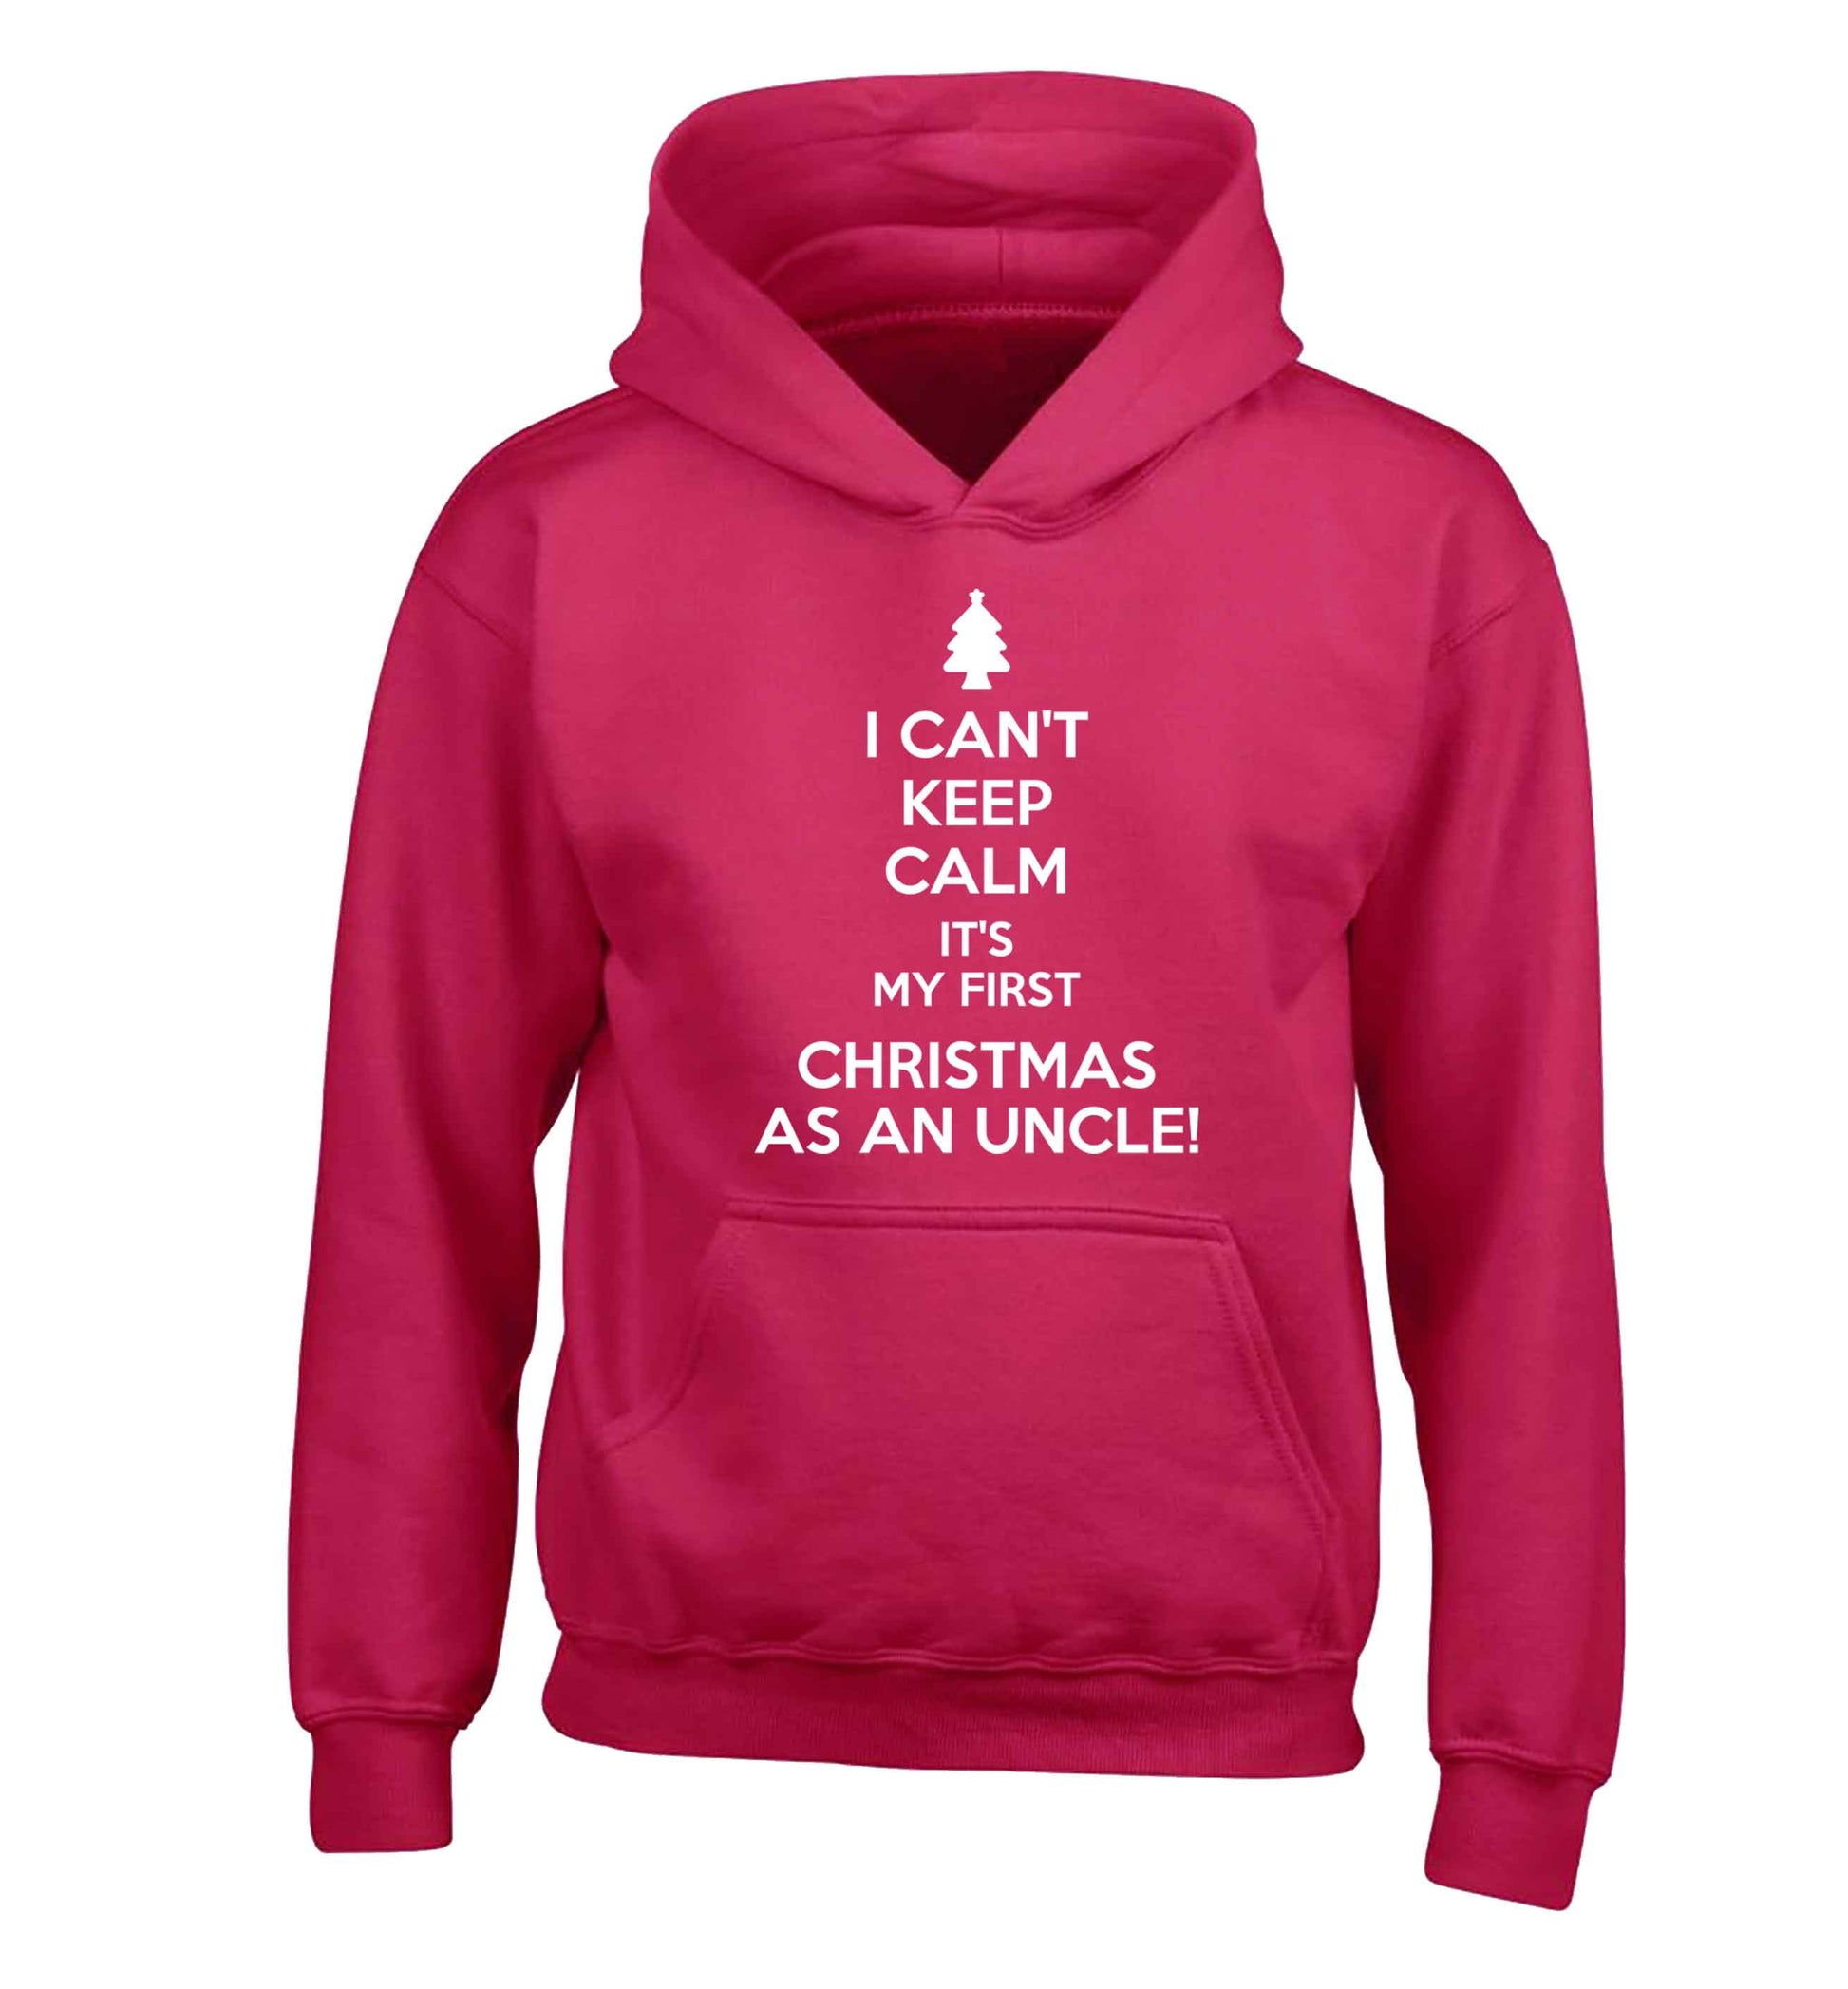 I can't keep calm it's my first Christmas as an uncle! children's pink hoodie 12-13 Years